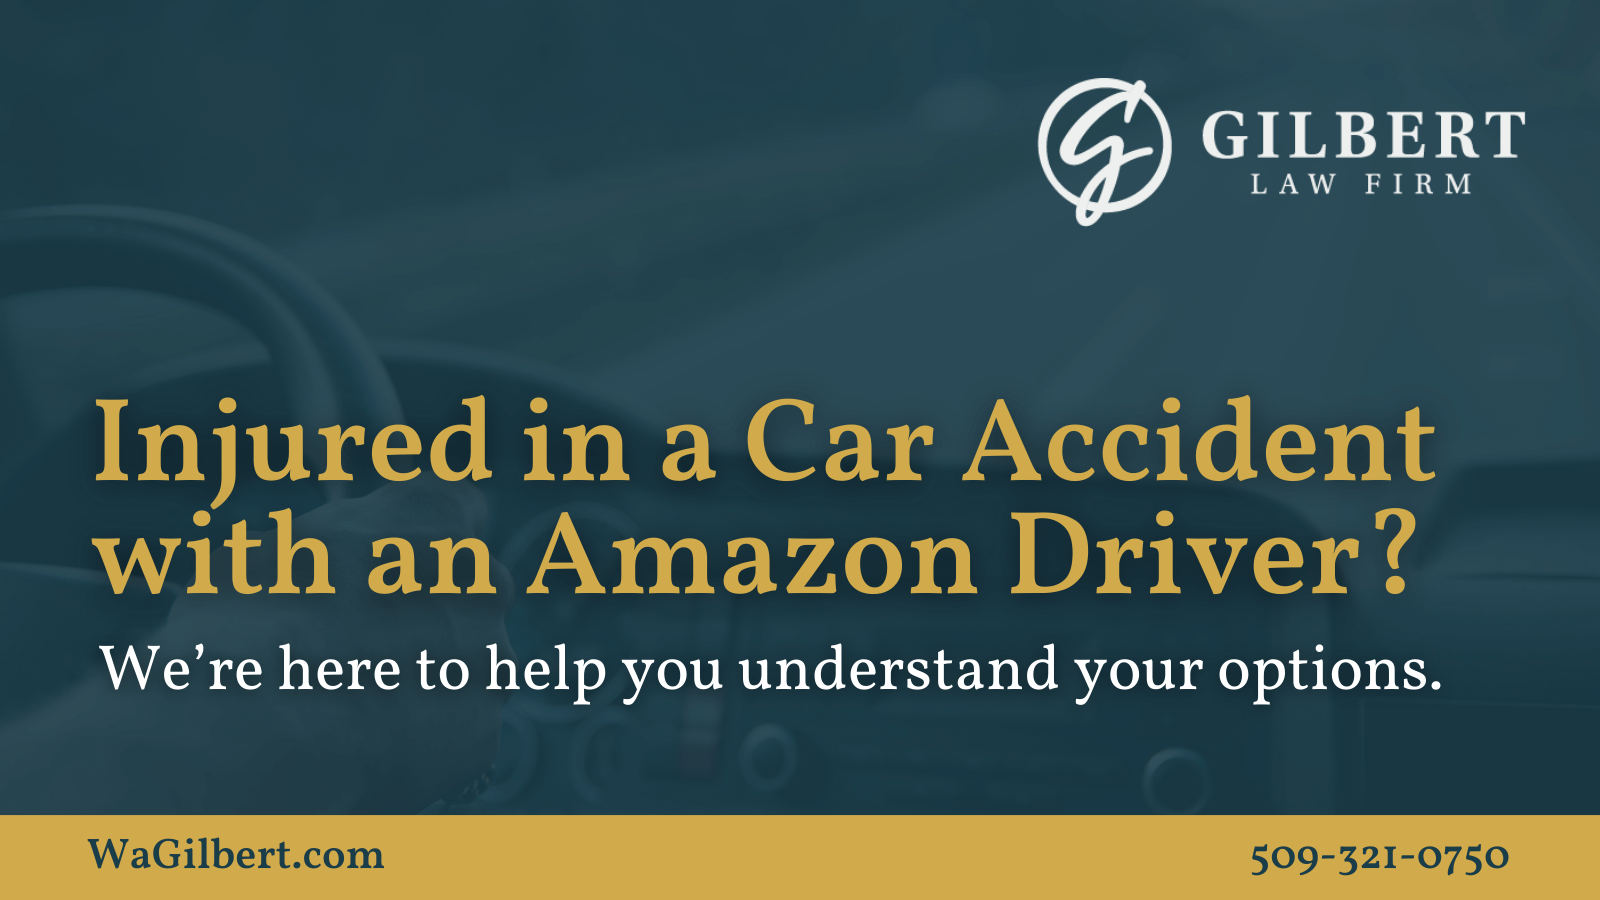 Injured in a Car Accident with an Amazon Driver | Gilbert Law Firm Spokane Washington